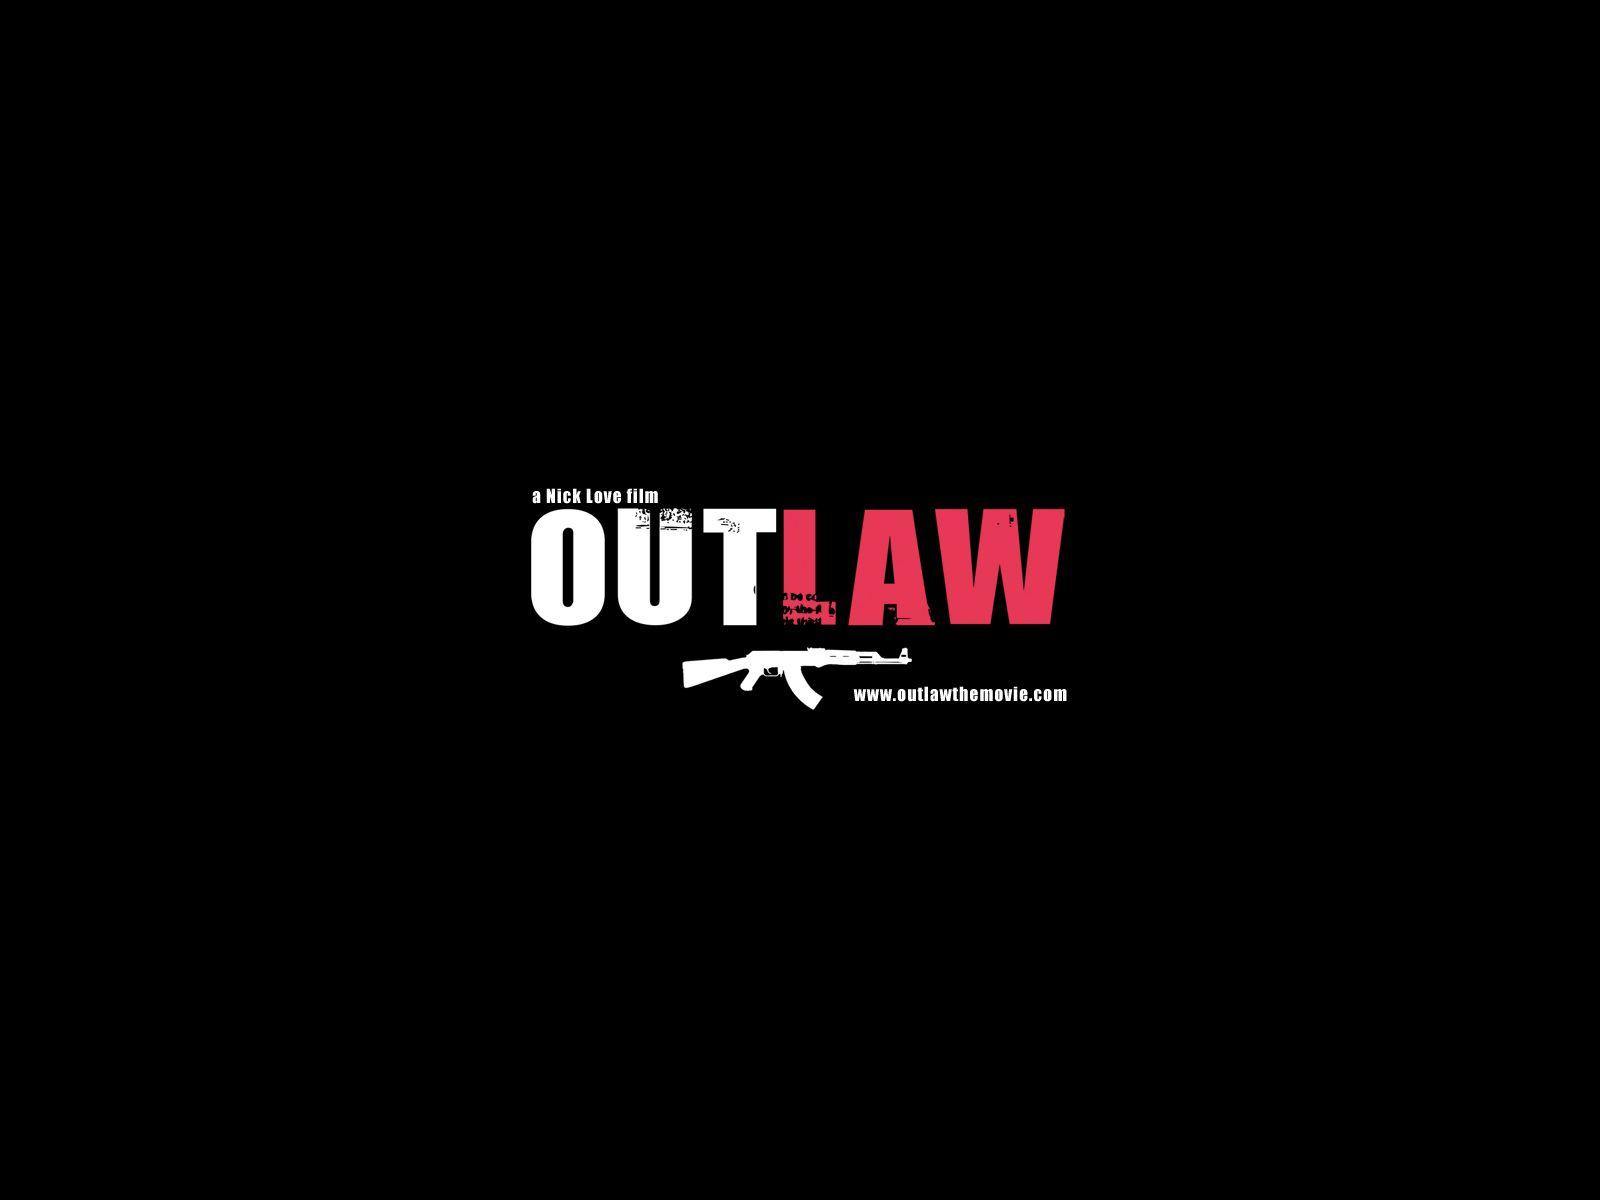 Outlaw Wallpaper Free Outlaw Background